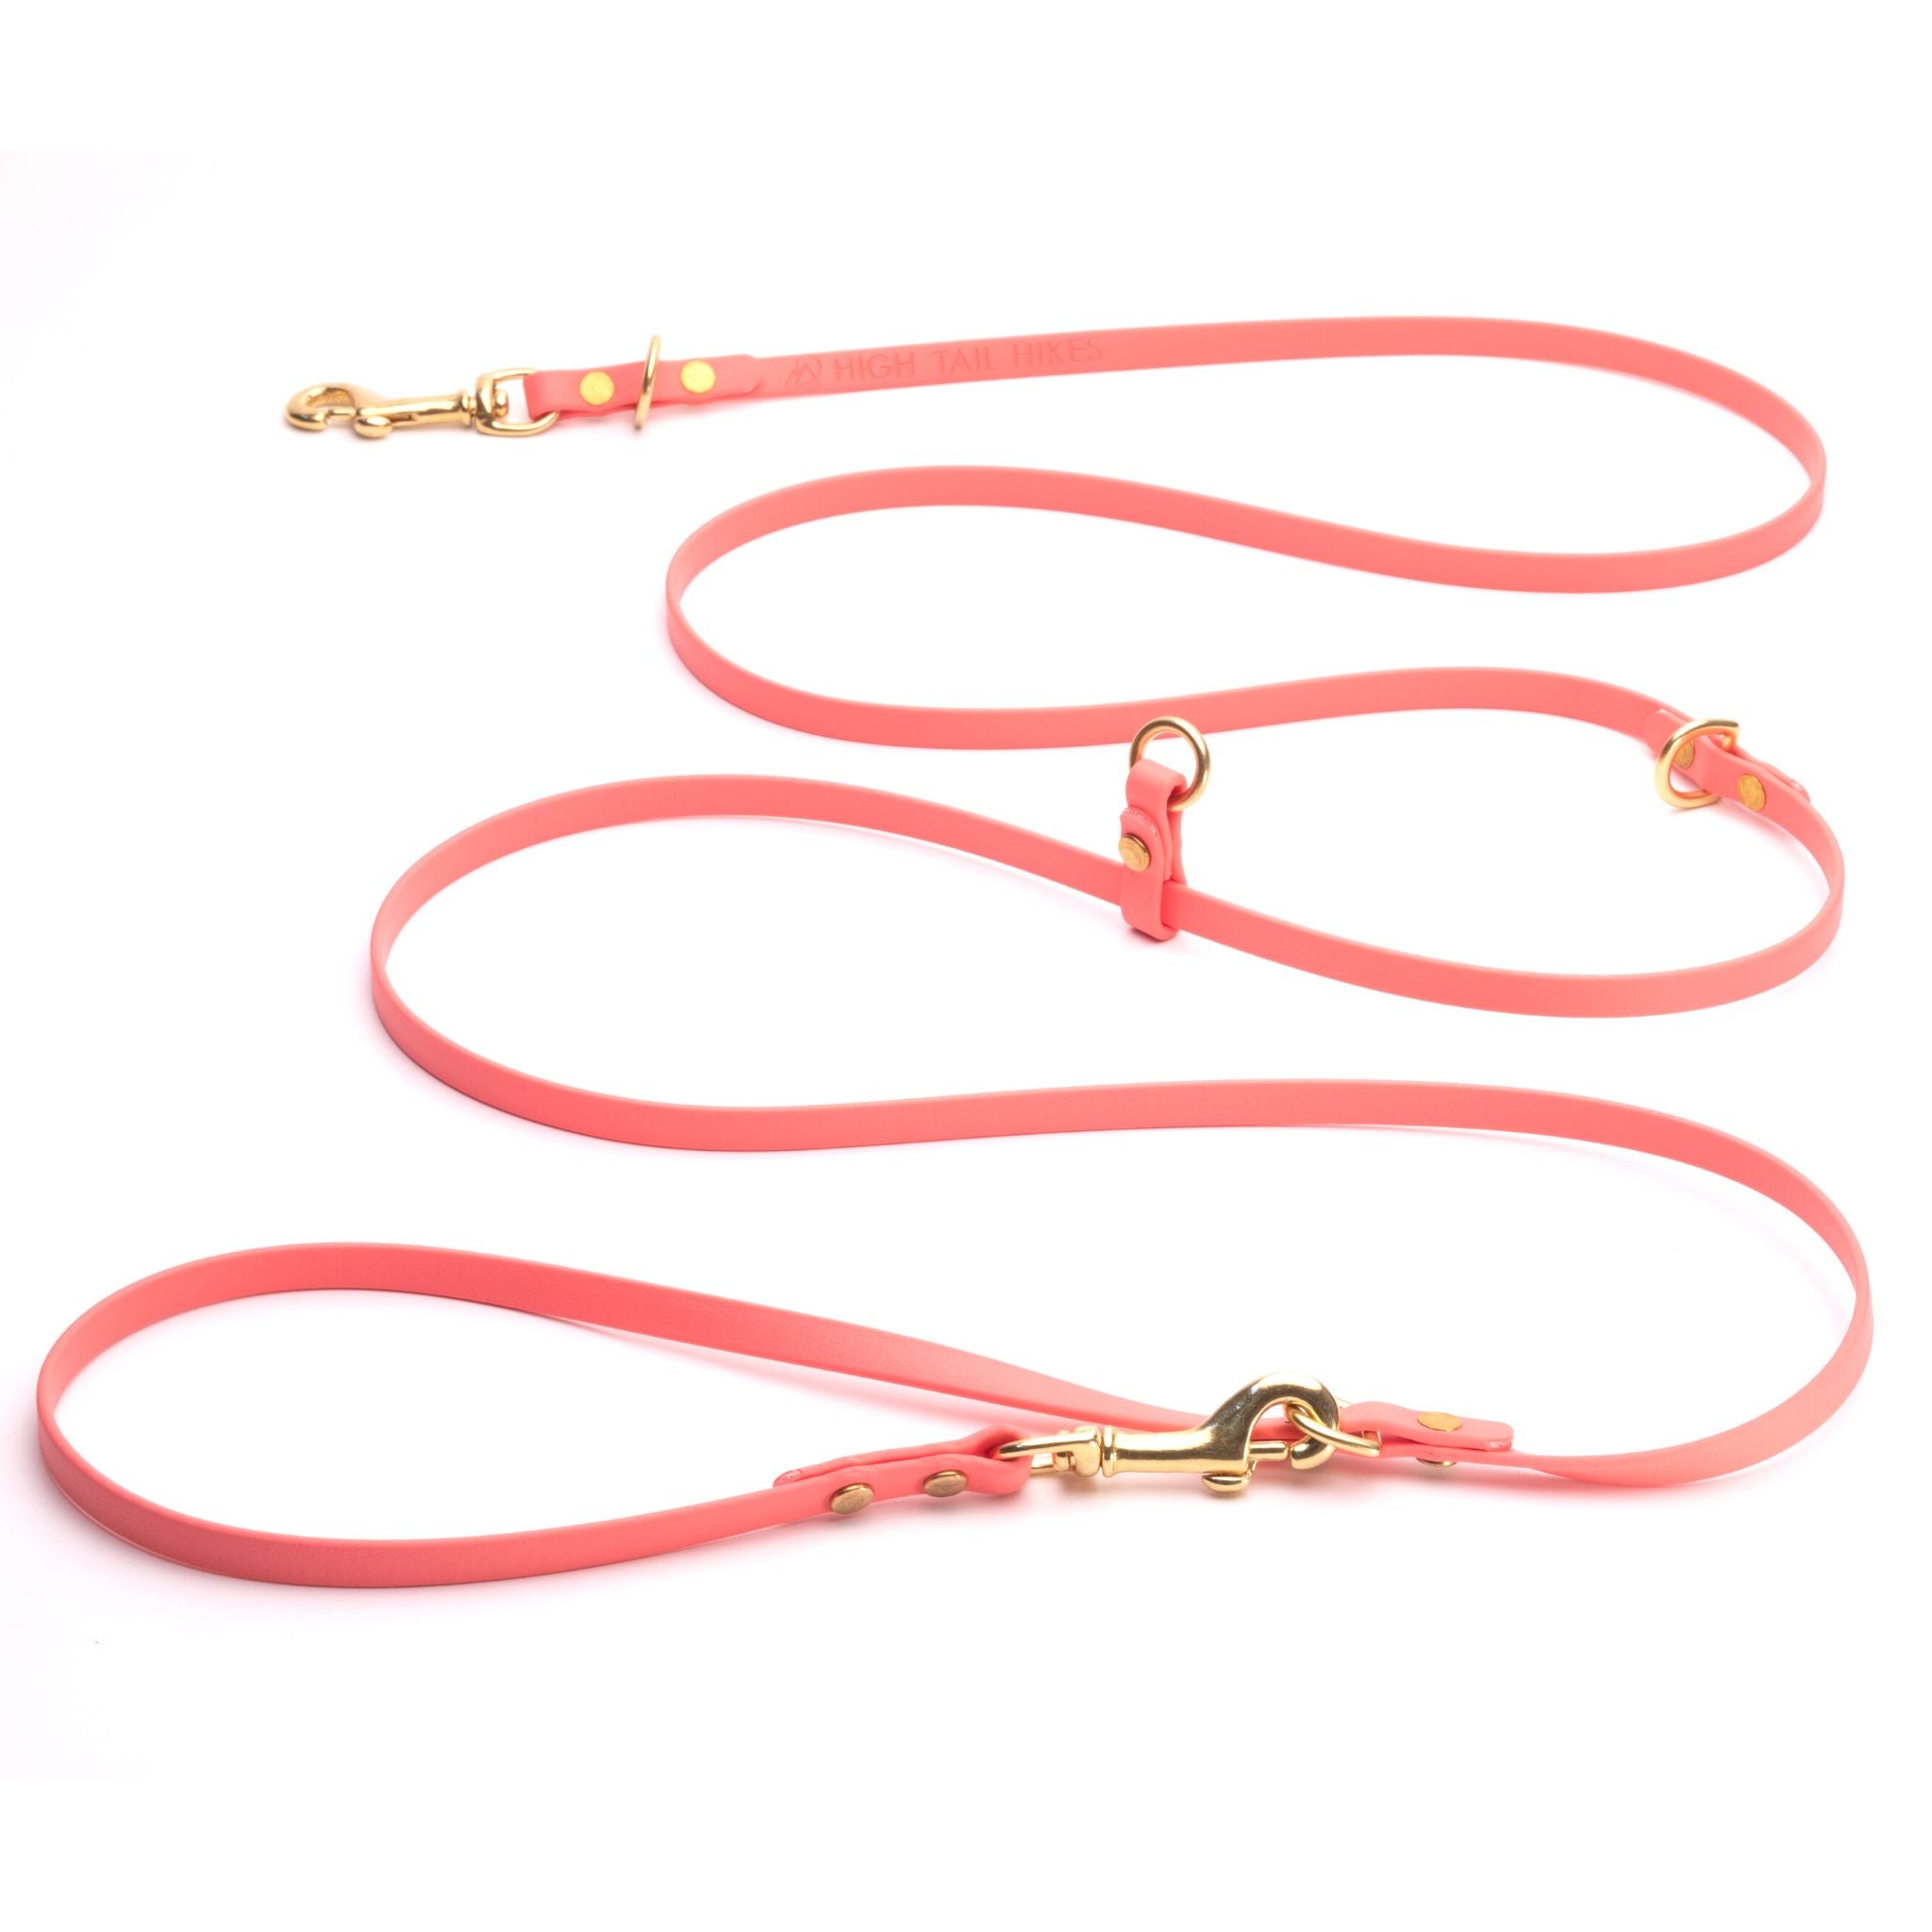 Hands Free 5 Way Dog Leash with Chrome, Rose Gold, Black, Rainbow, Brass  Snap, 1/2 OR 3/4 Biothane, Custom Colours and Snaps